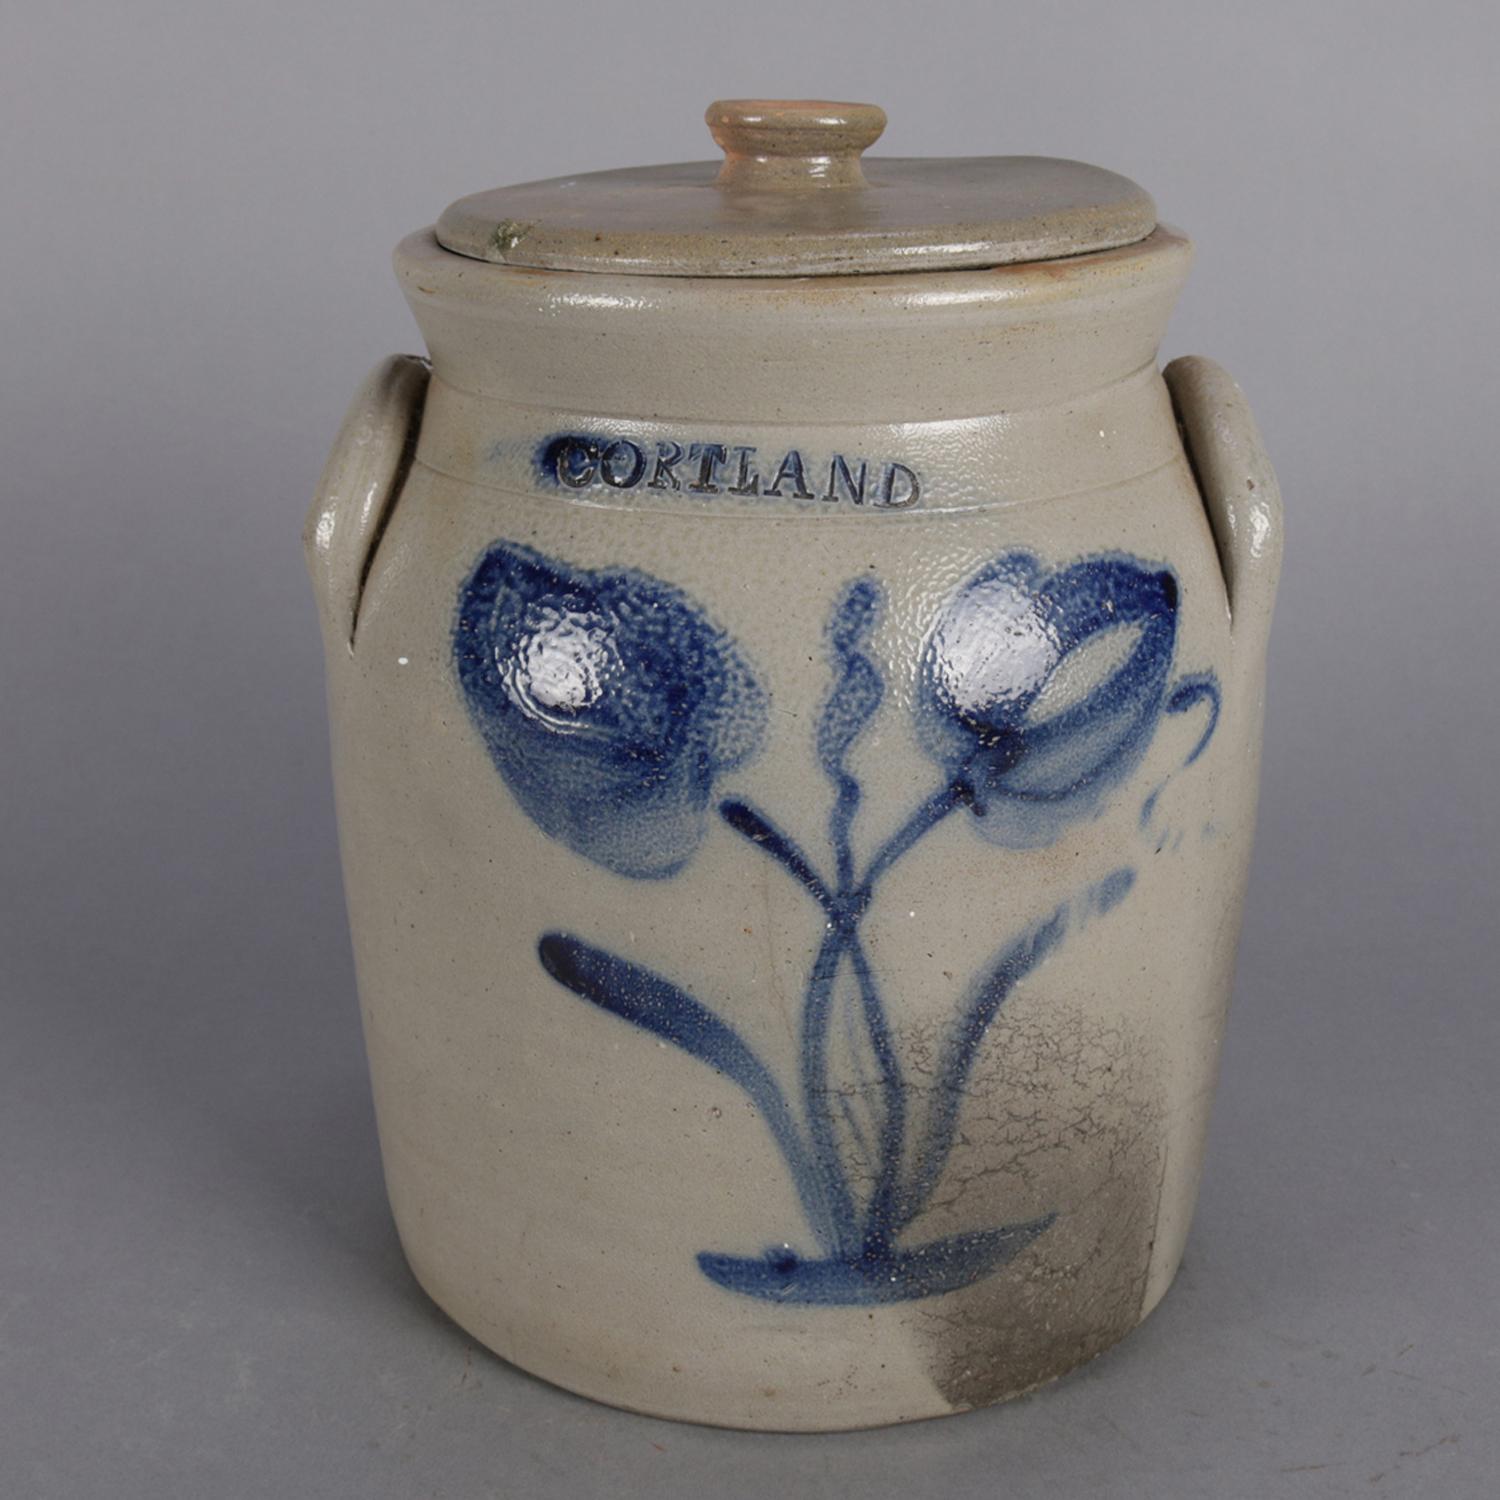 Antique New York double handled and lidded stoneware crock features hand-painted blue decorated tulip design surmounted by Cortland stamp, circa 1860.

Measures: 12